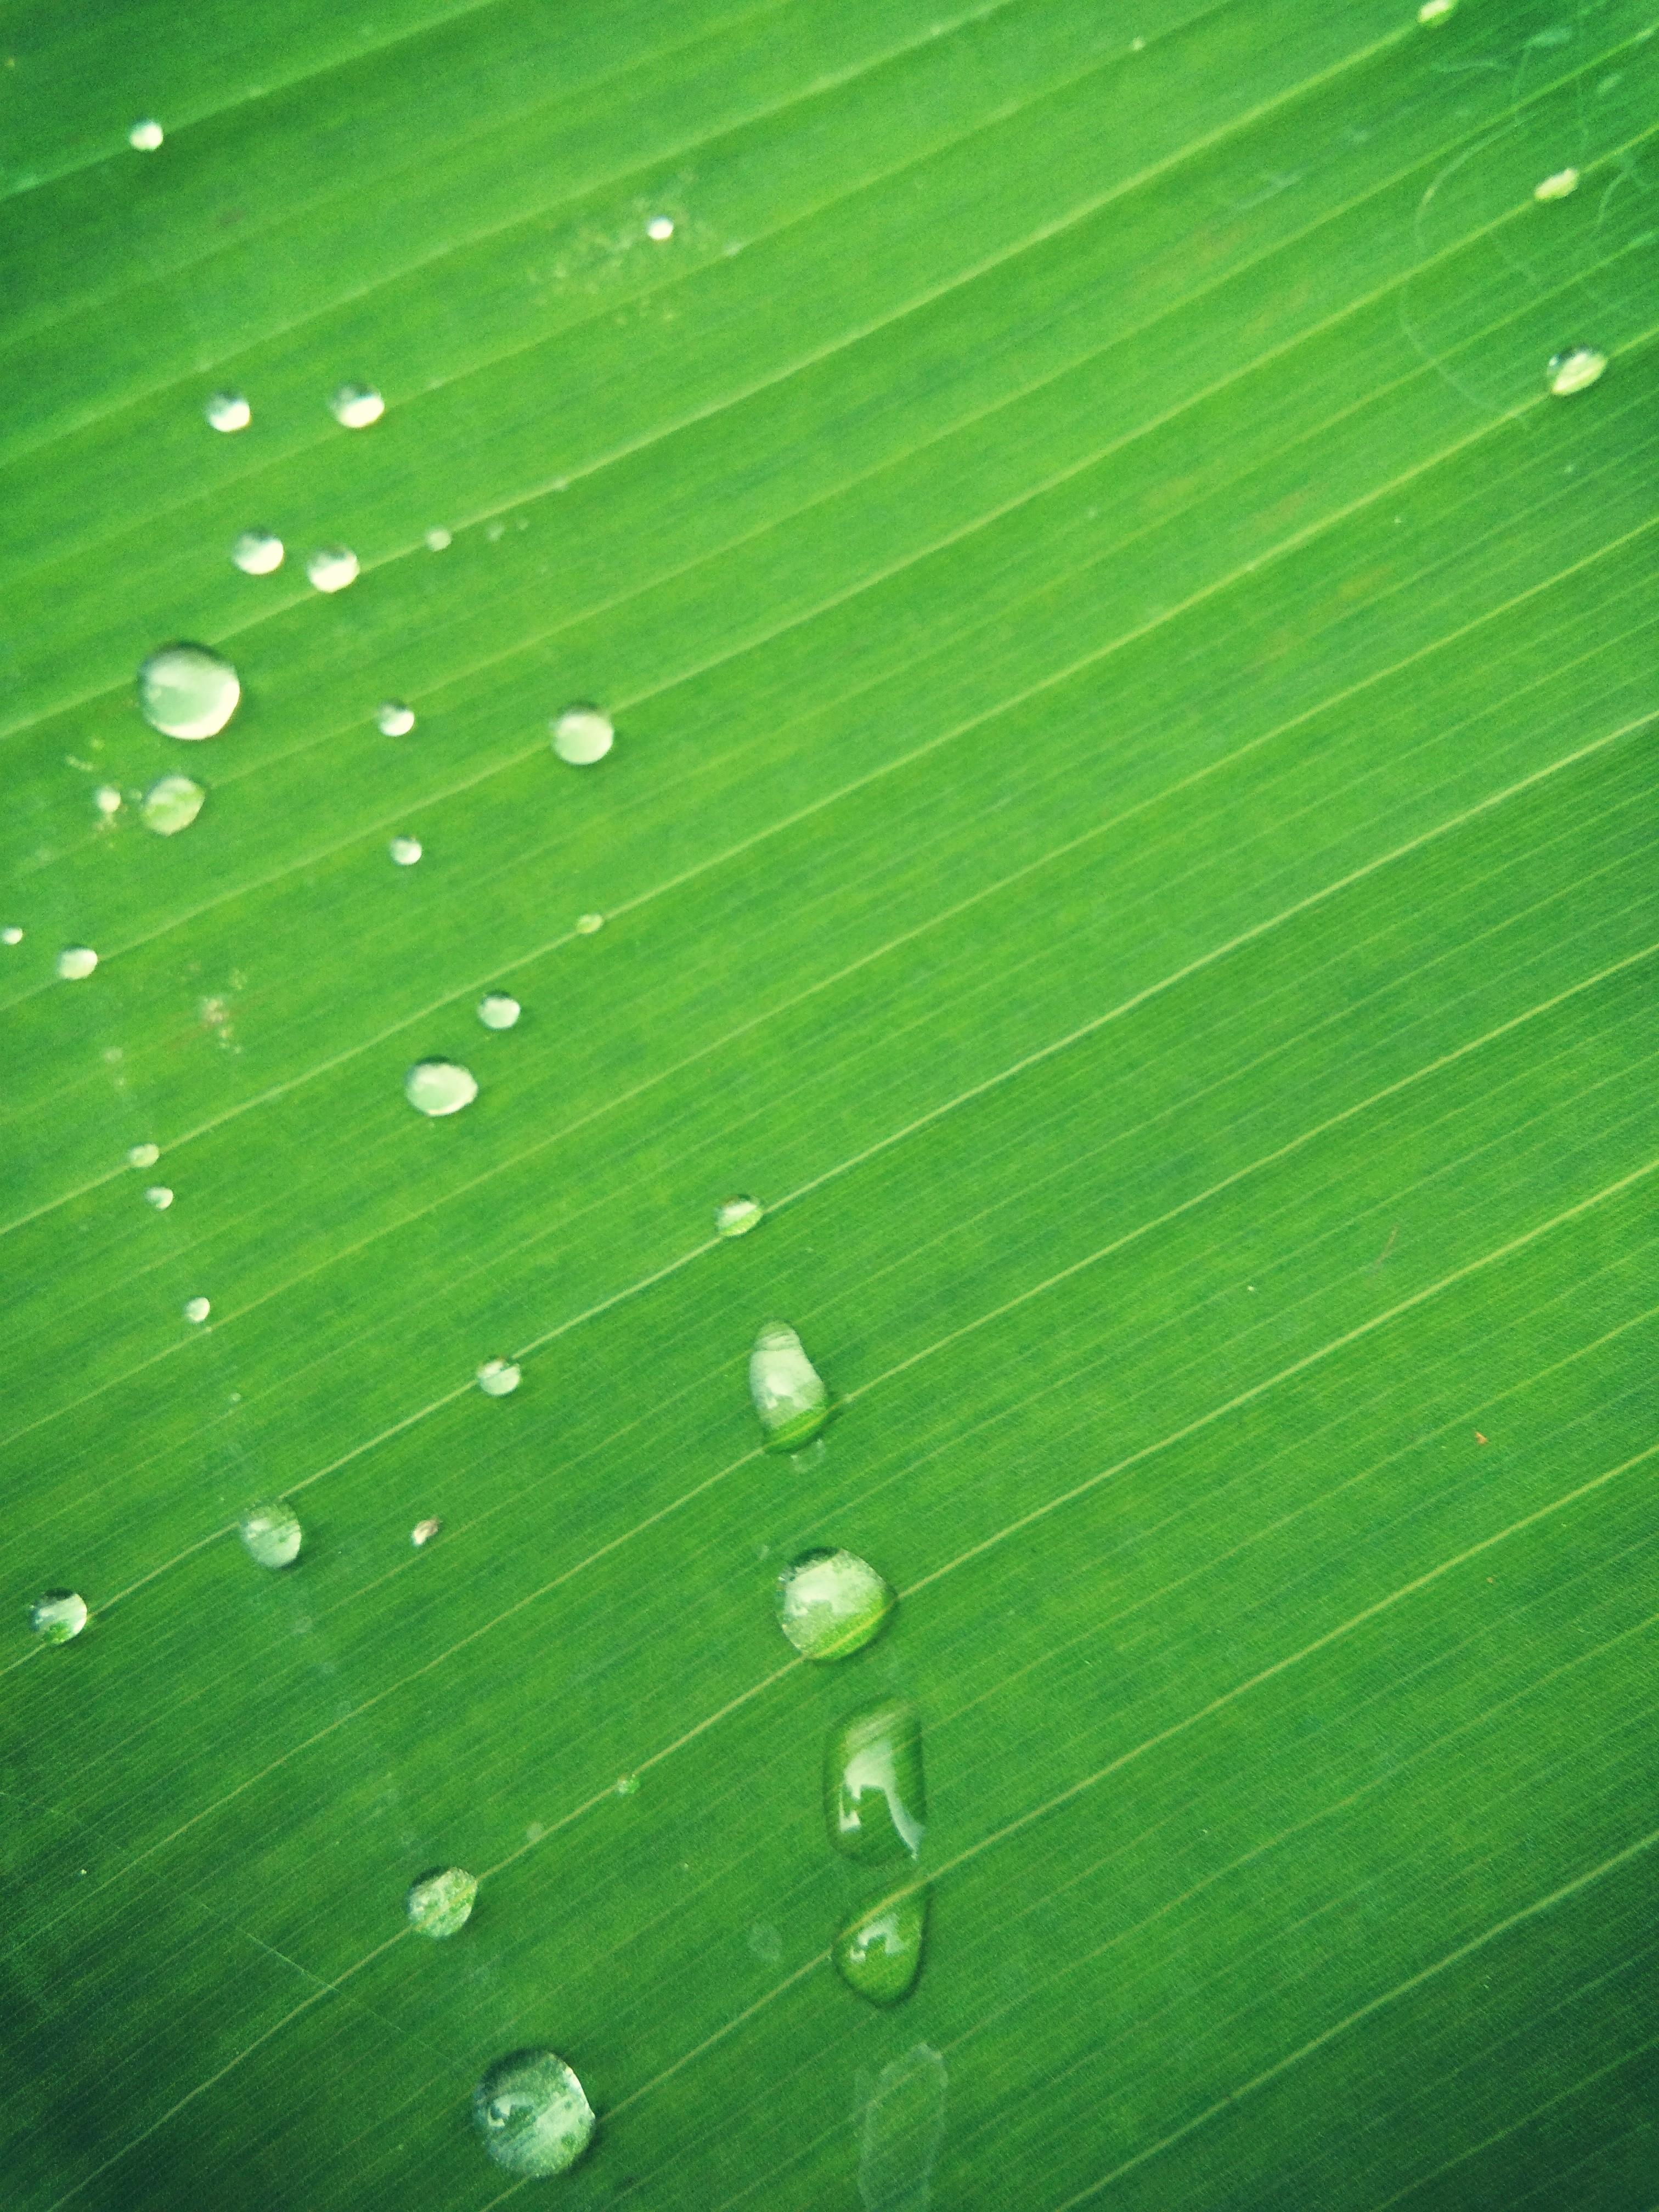 Homemade Window Wallpaper From Banana Leaves By Using - Ensete , HD Wallpaper & Backgrounds